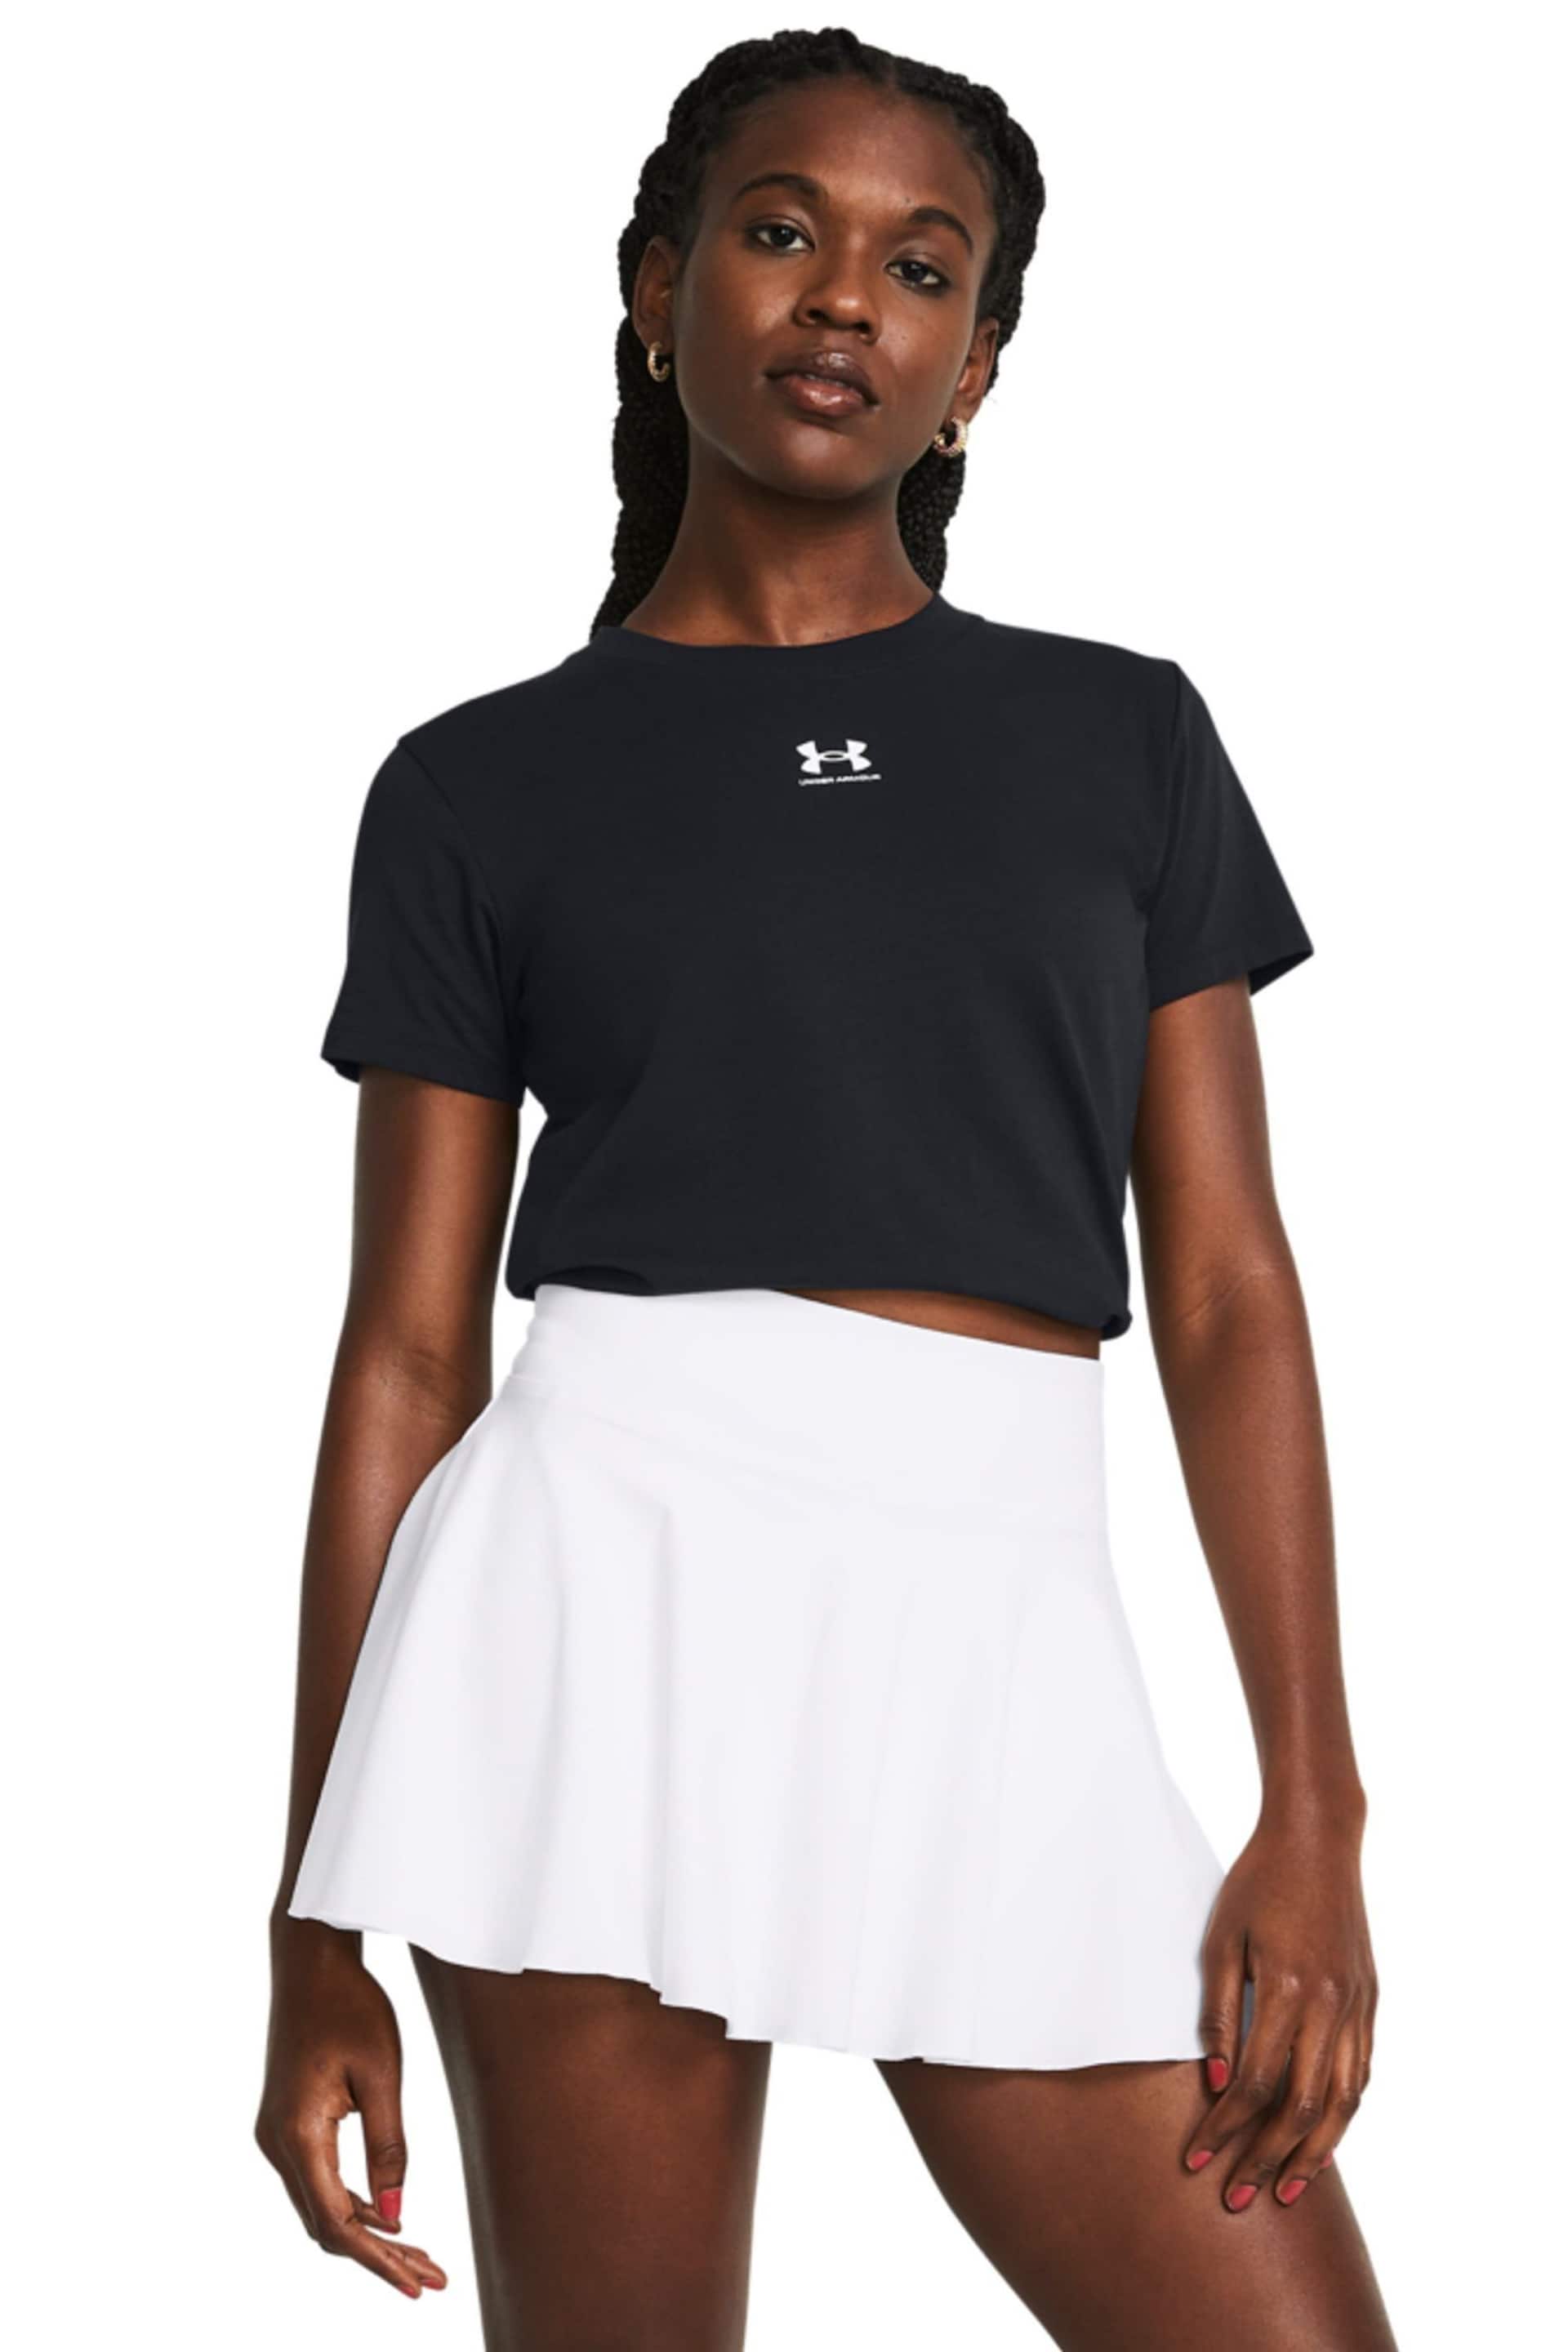 Under Armour Black Campus Core T-Shirt - Image 1 of 3